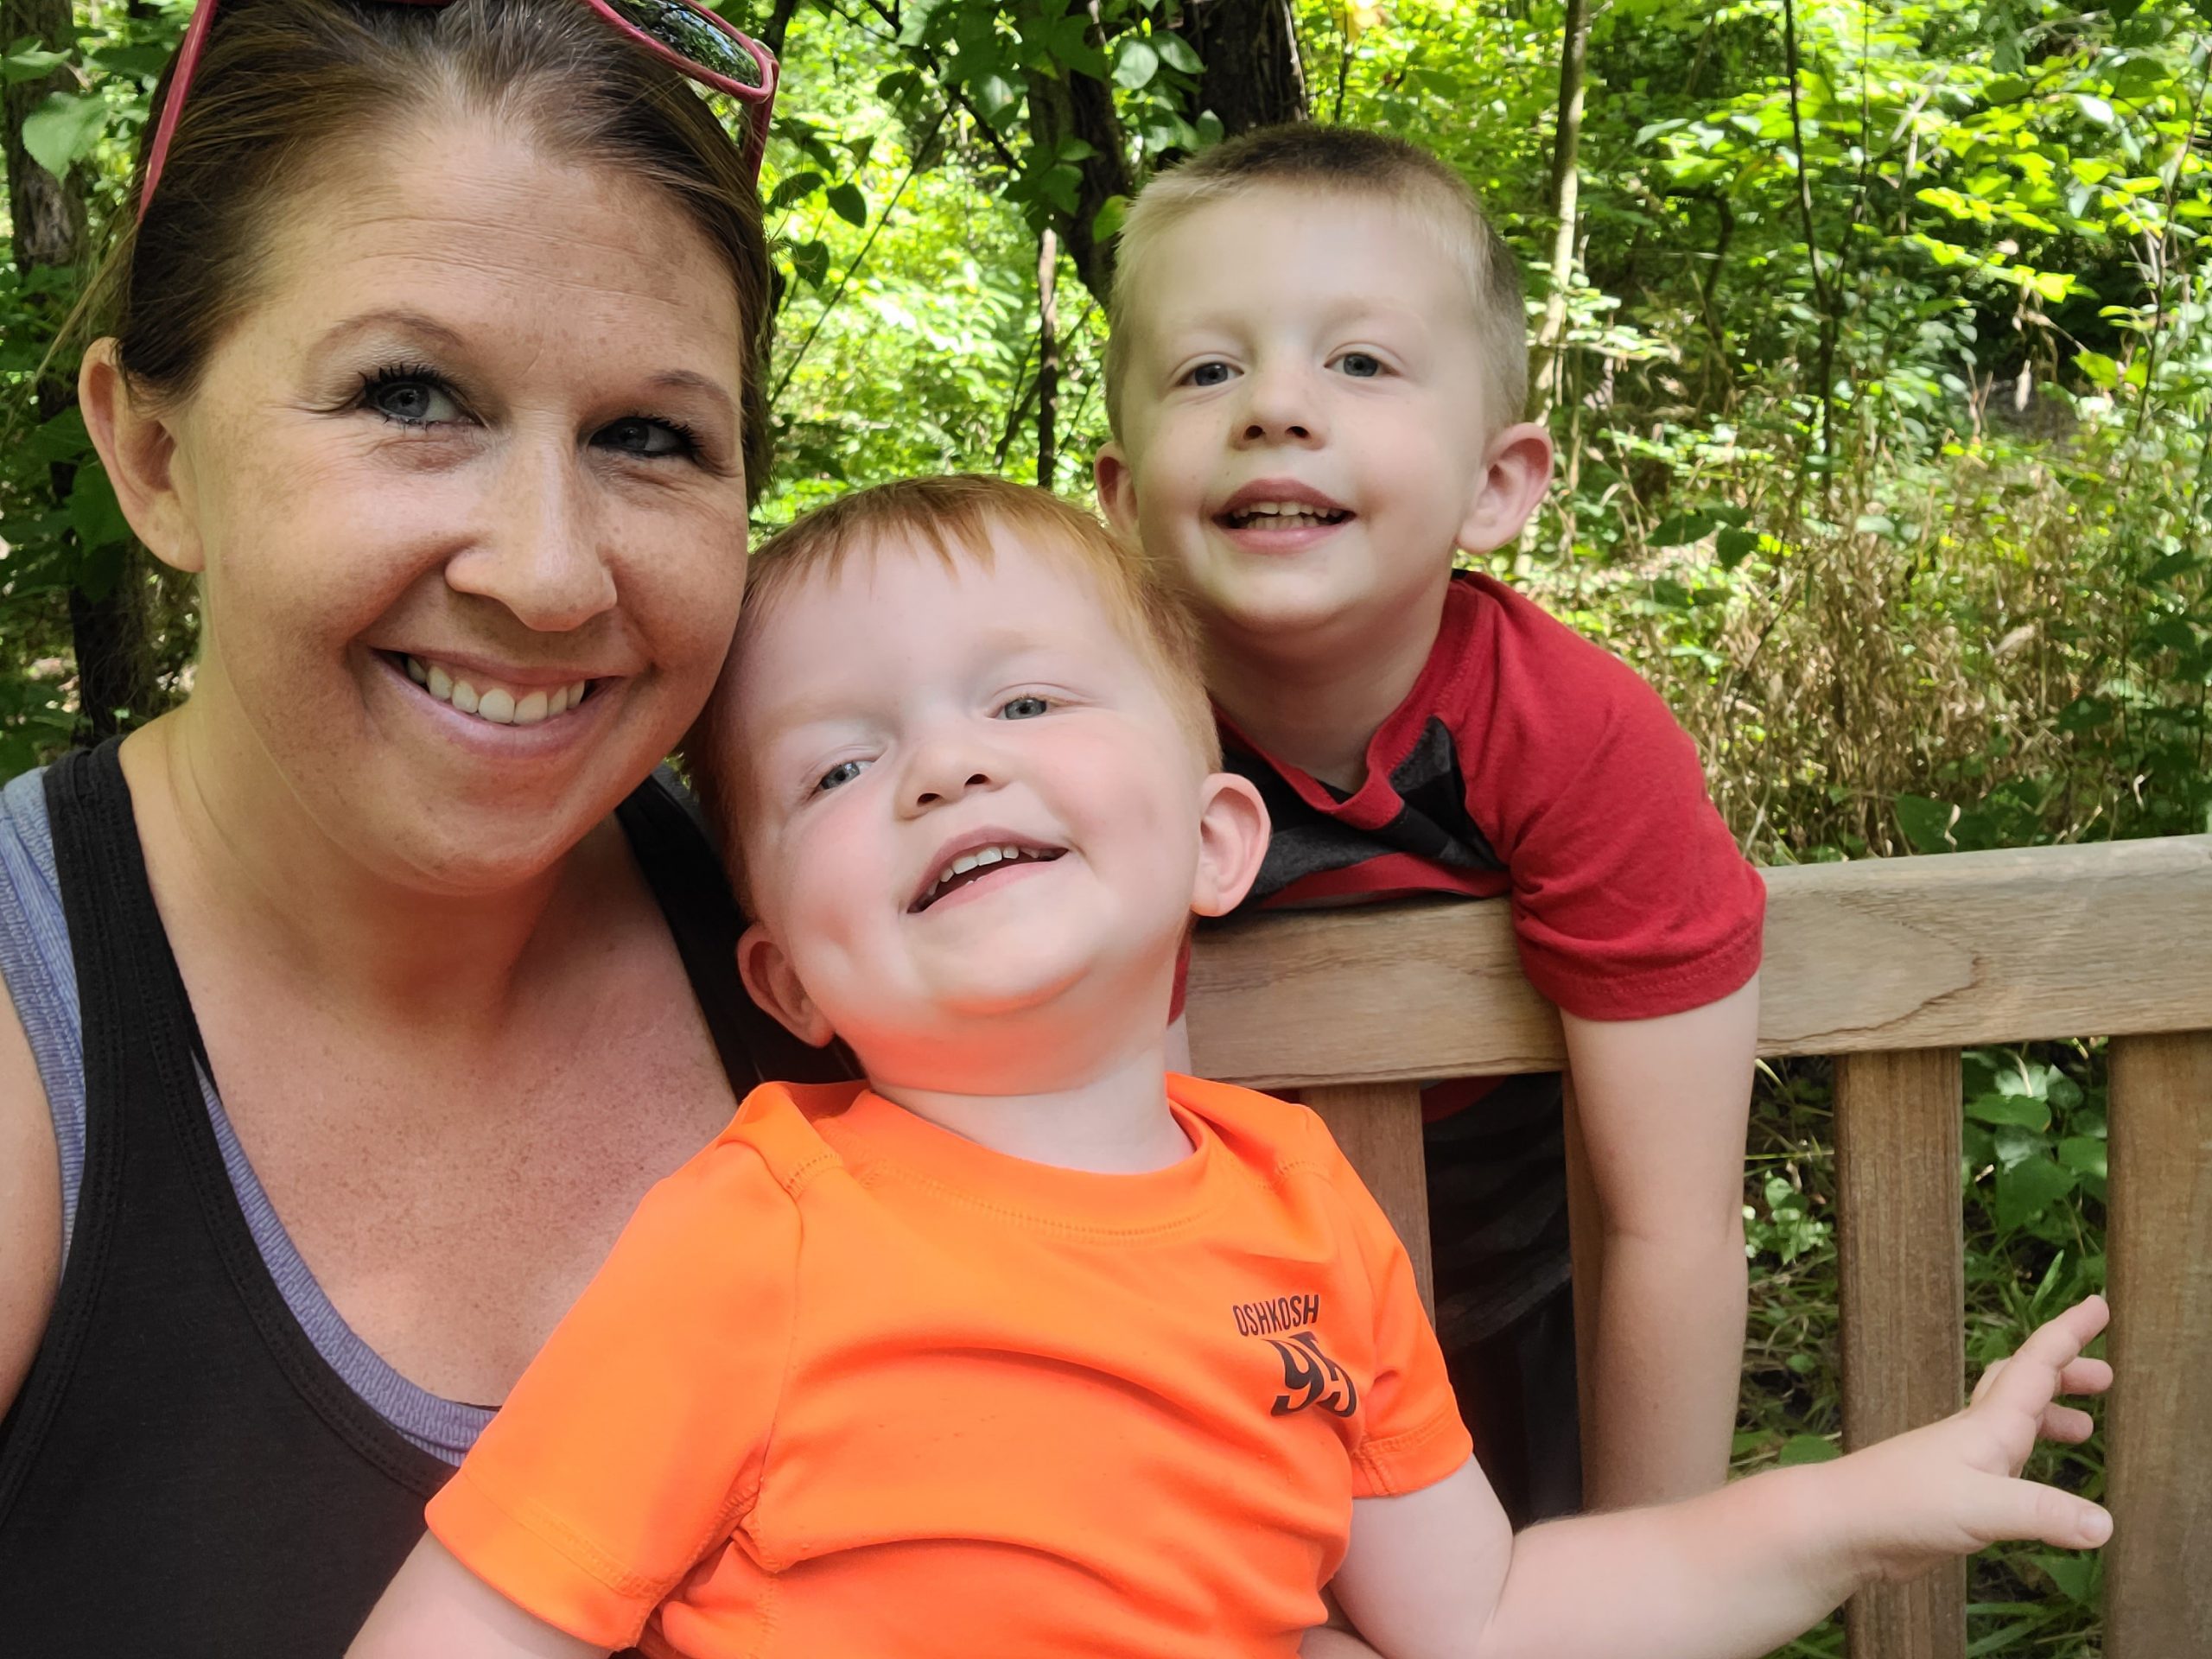 Kim Zaayer and her sons on the park bench